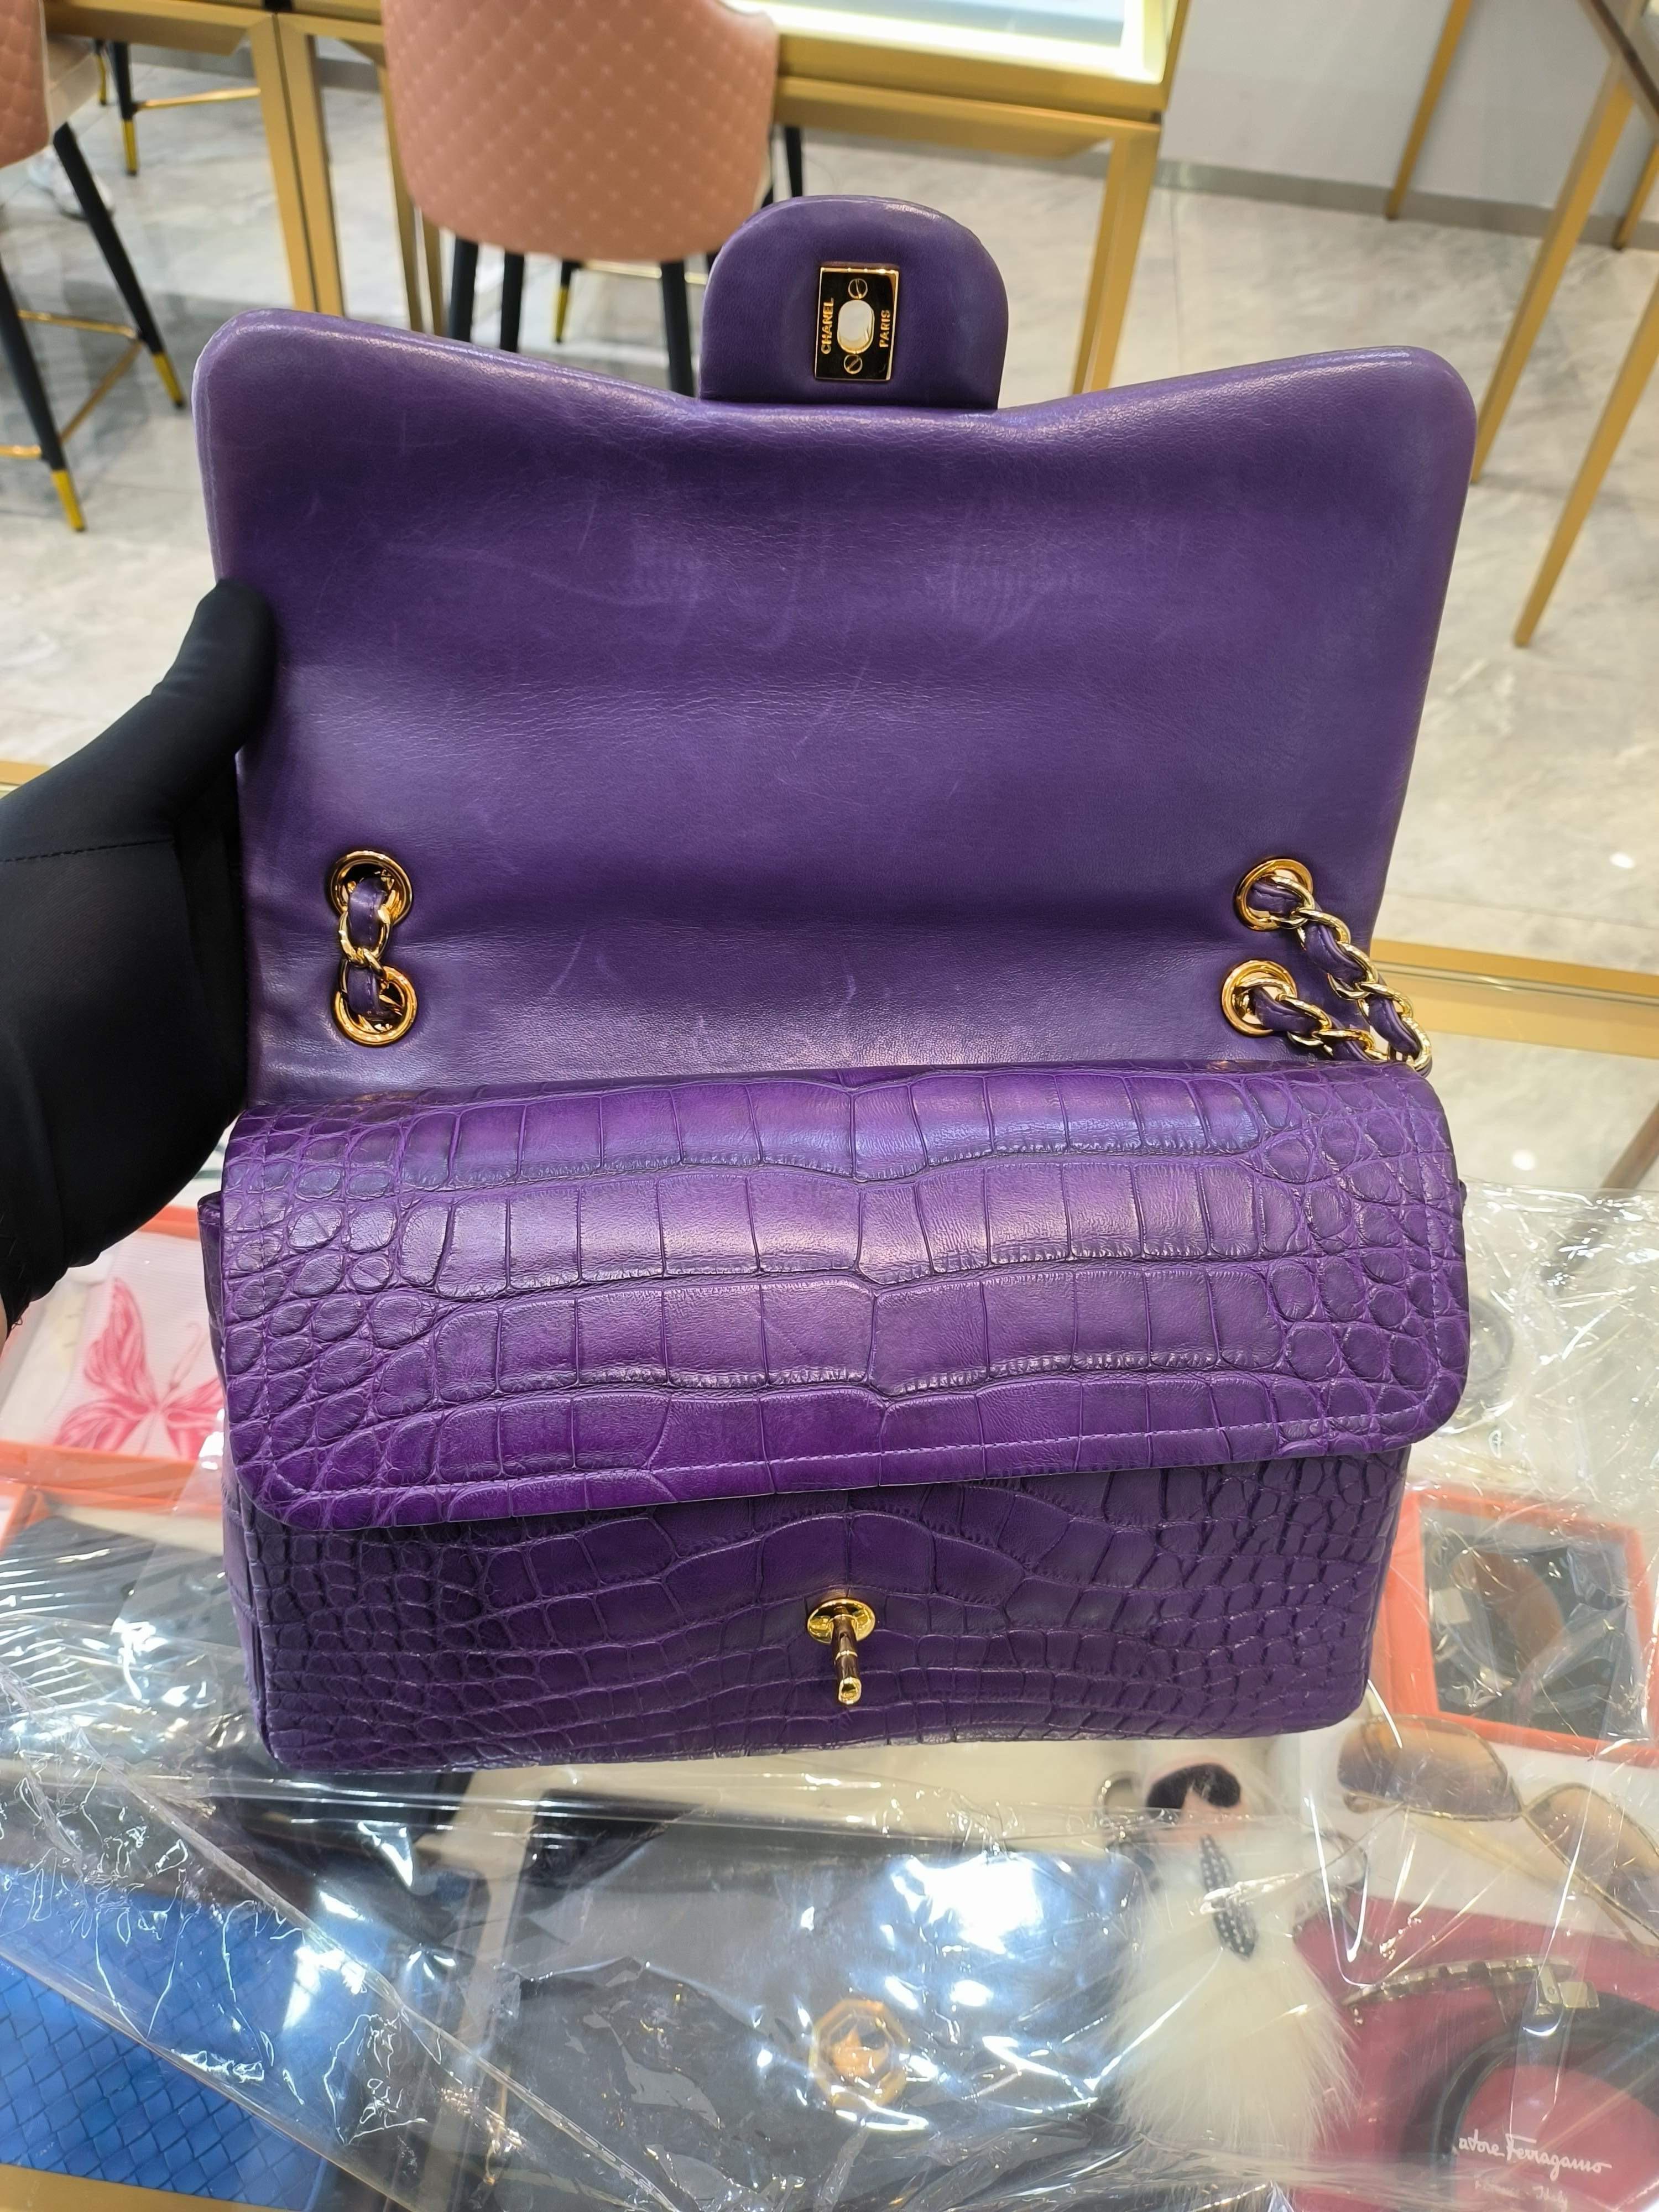 AN EXQUISITE JUMBO CHANEL PURPLE CROCODILE CLASSIC FLAP BAG WITH GOLD TONE HARDWARE CHANEL, 2013-2014 Year.
Crafted with precision using rare alligator leather, and touched with a fabulous purple color, this Classic Double Flap bag from Chanel